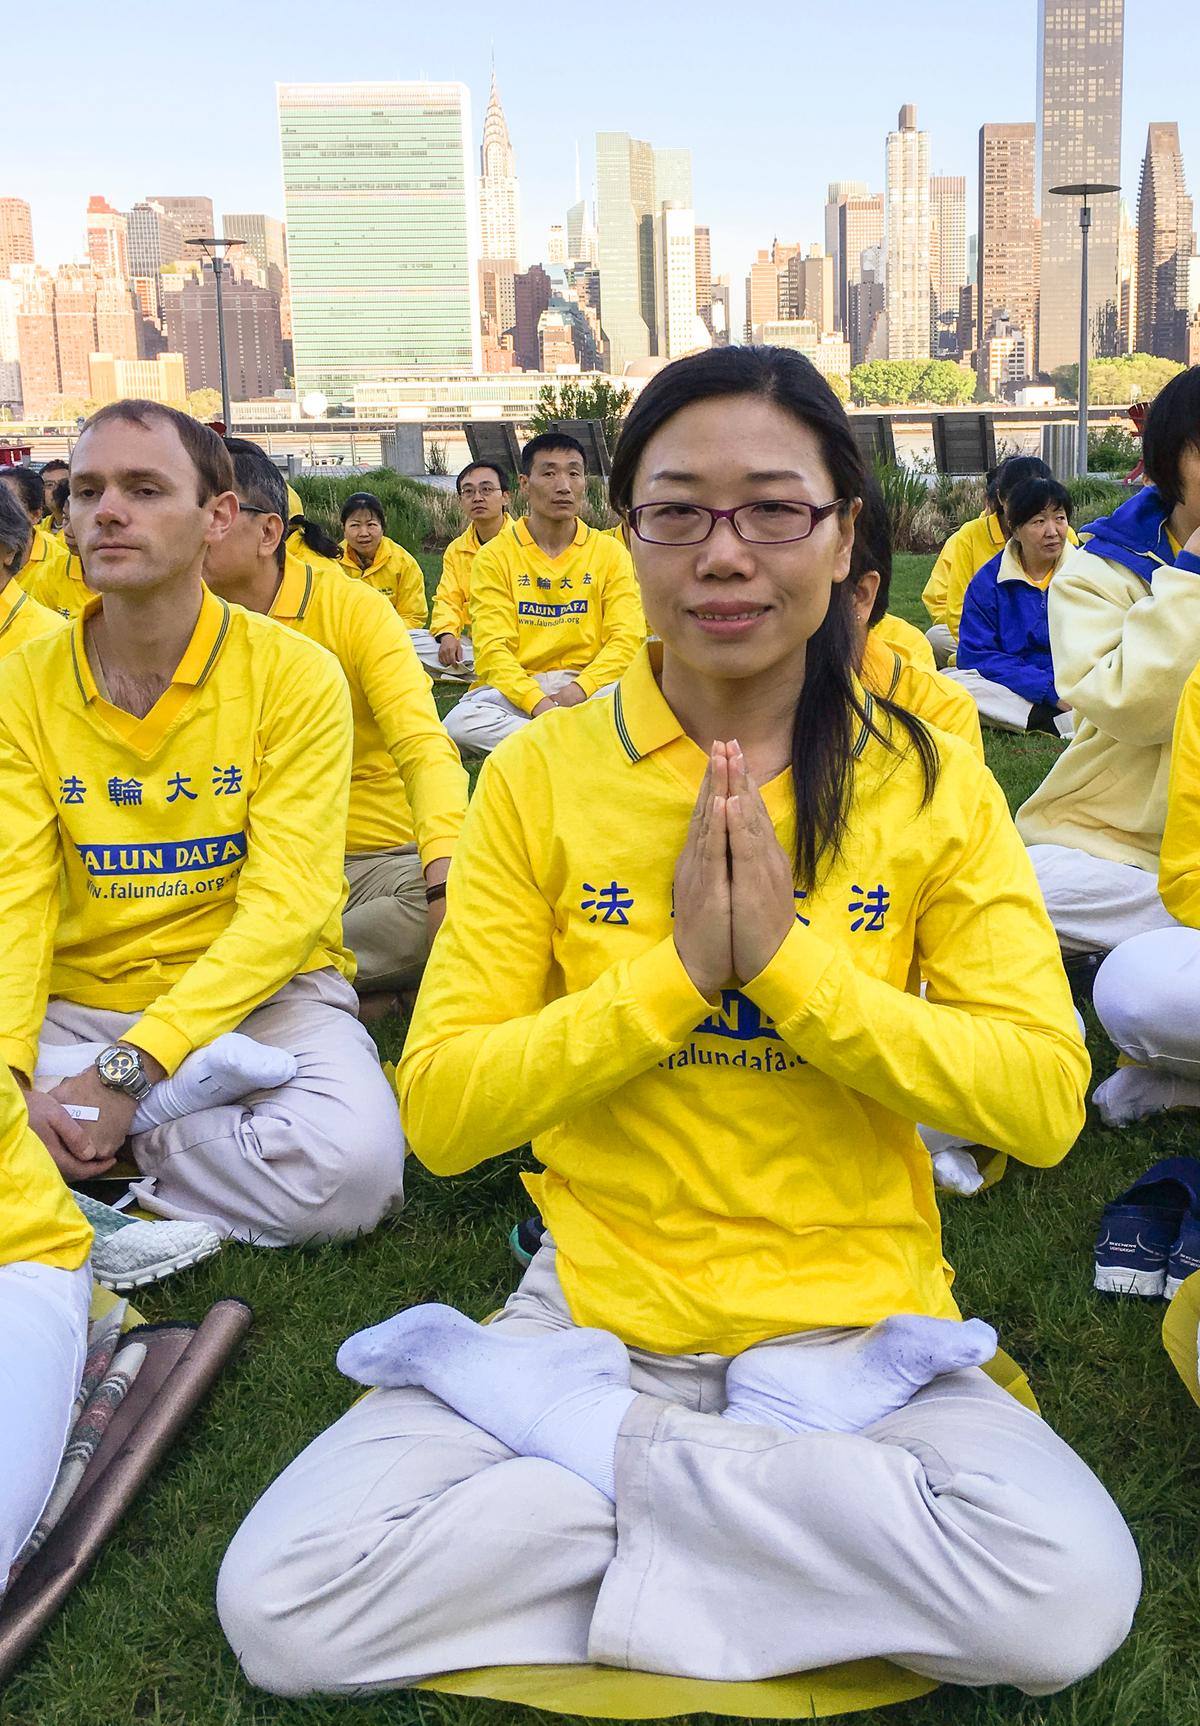 Li Linlin, a Falun Gong practitioner from Shandong Province, joins a character formation event at Gantry Plaza State Park on May 12, 2016. (Larry Ong/Epoch Times)